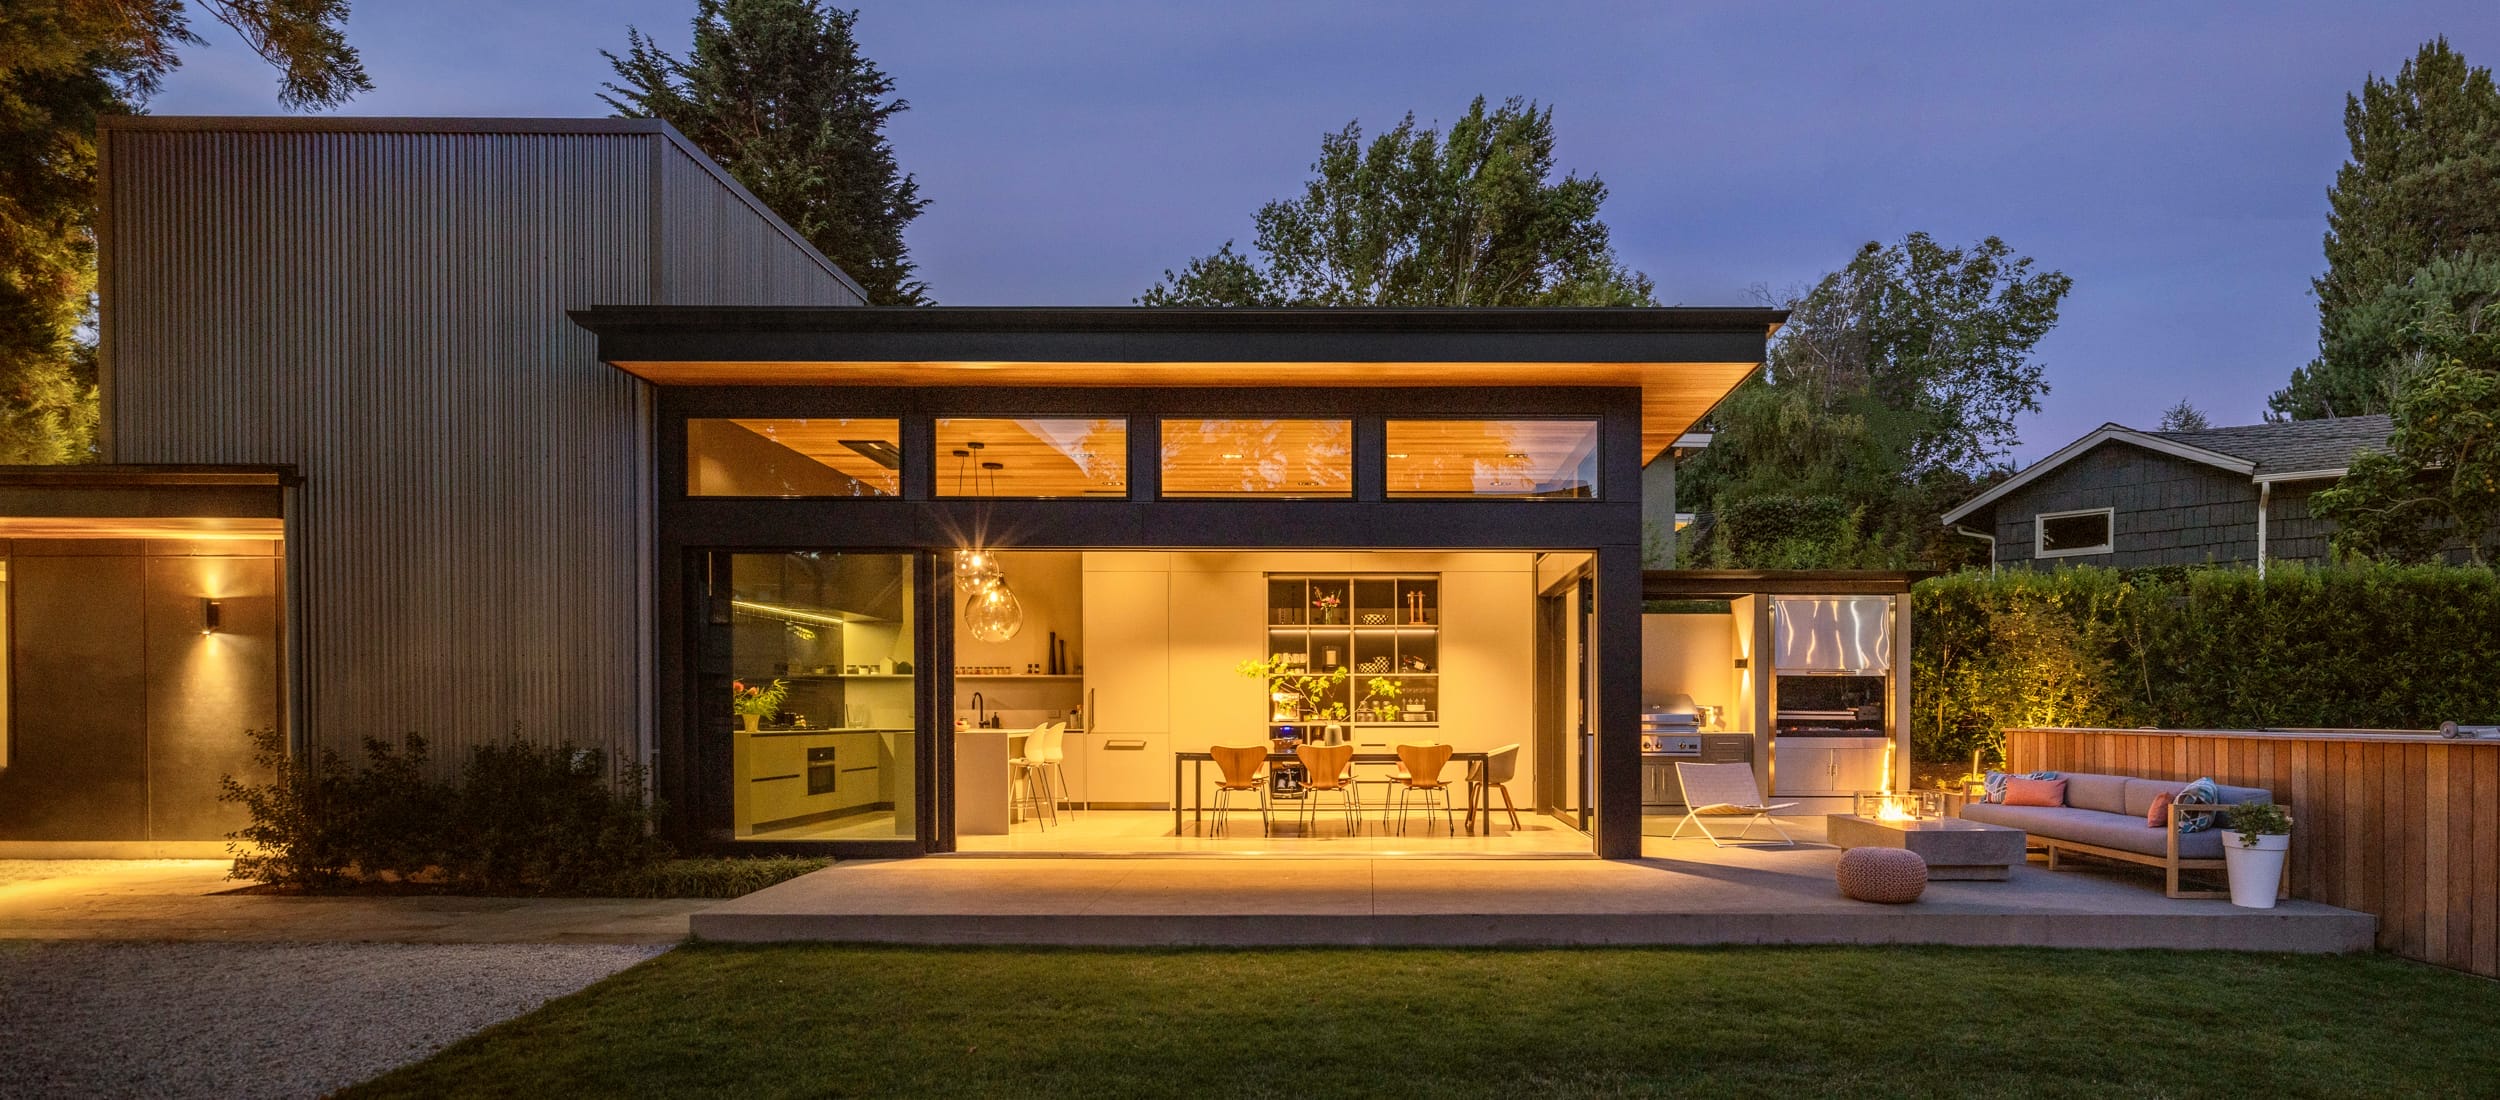 A modern home with a large patio and floating home design at dusk.